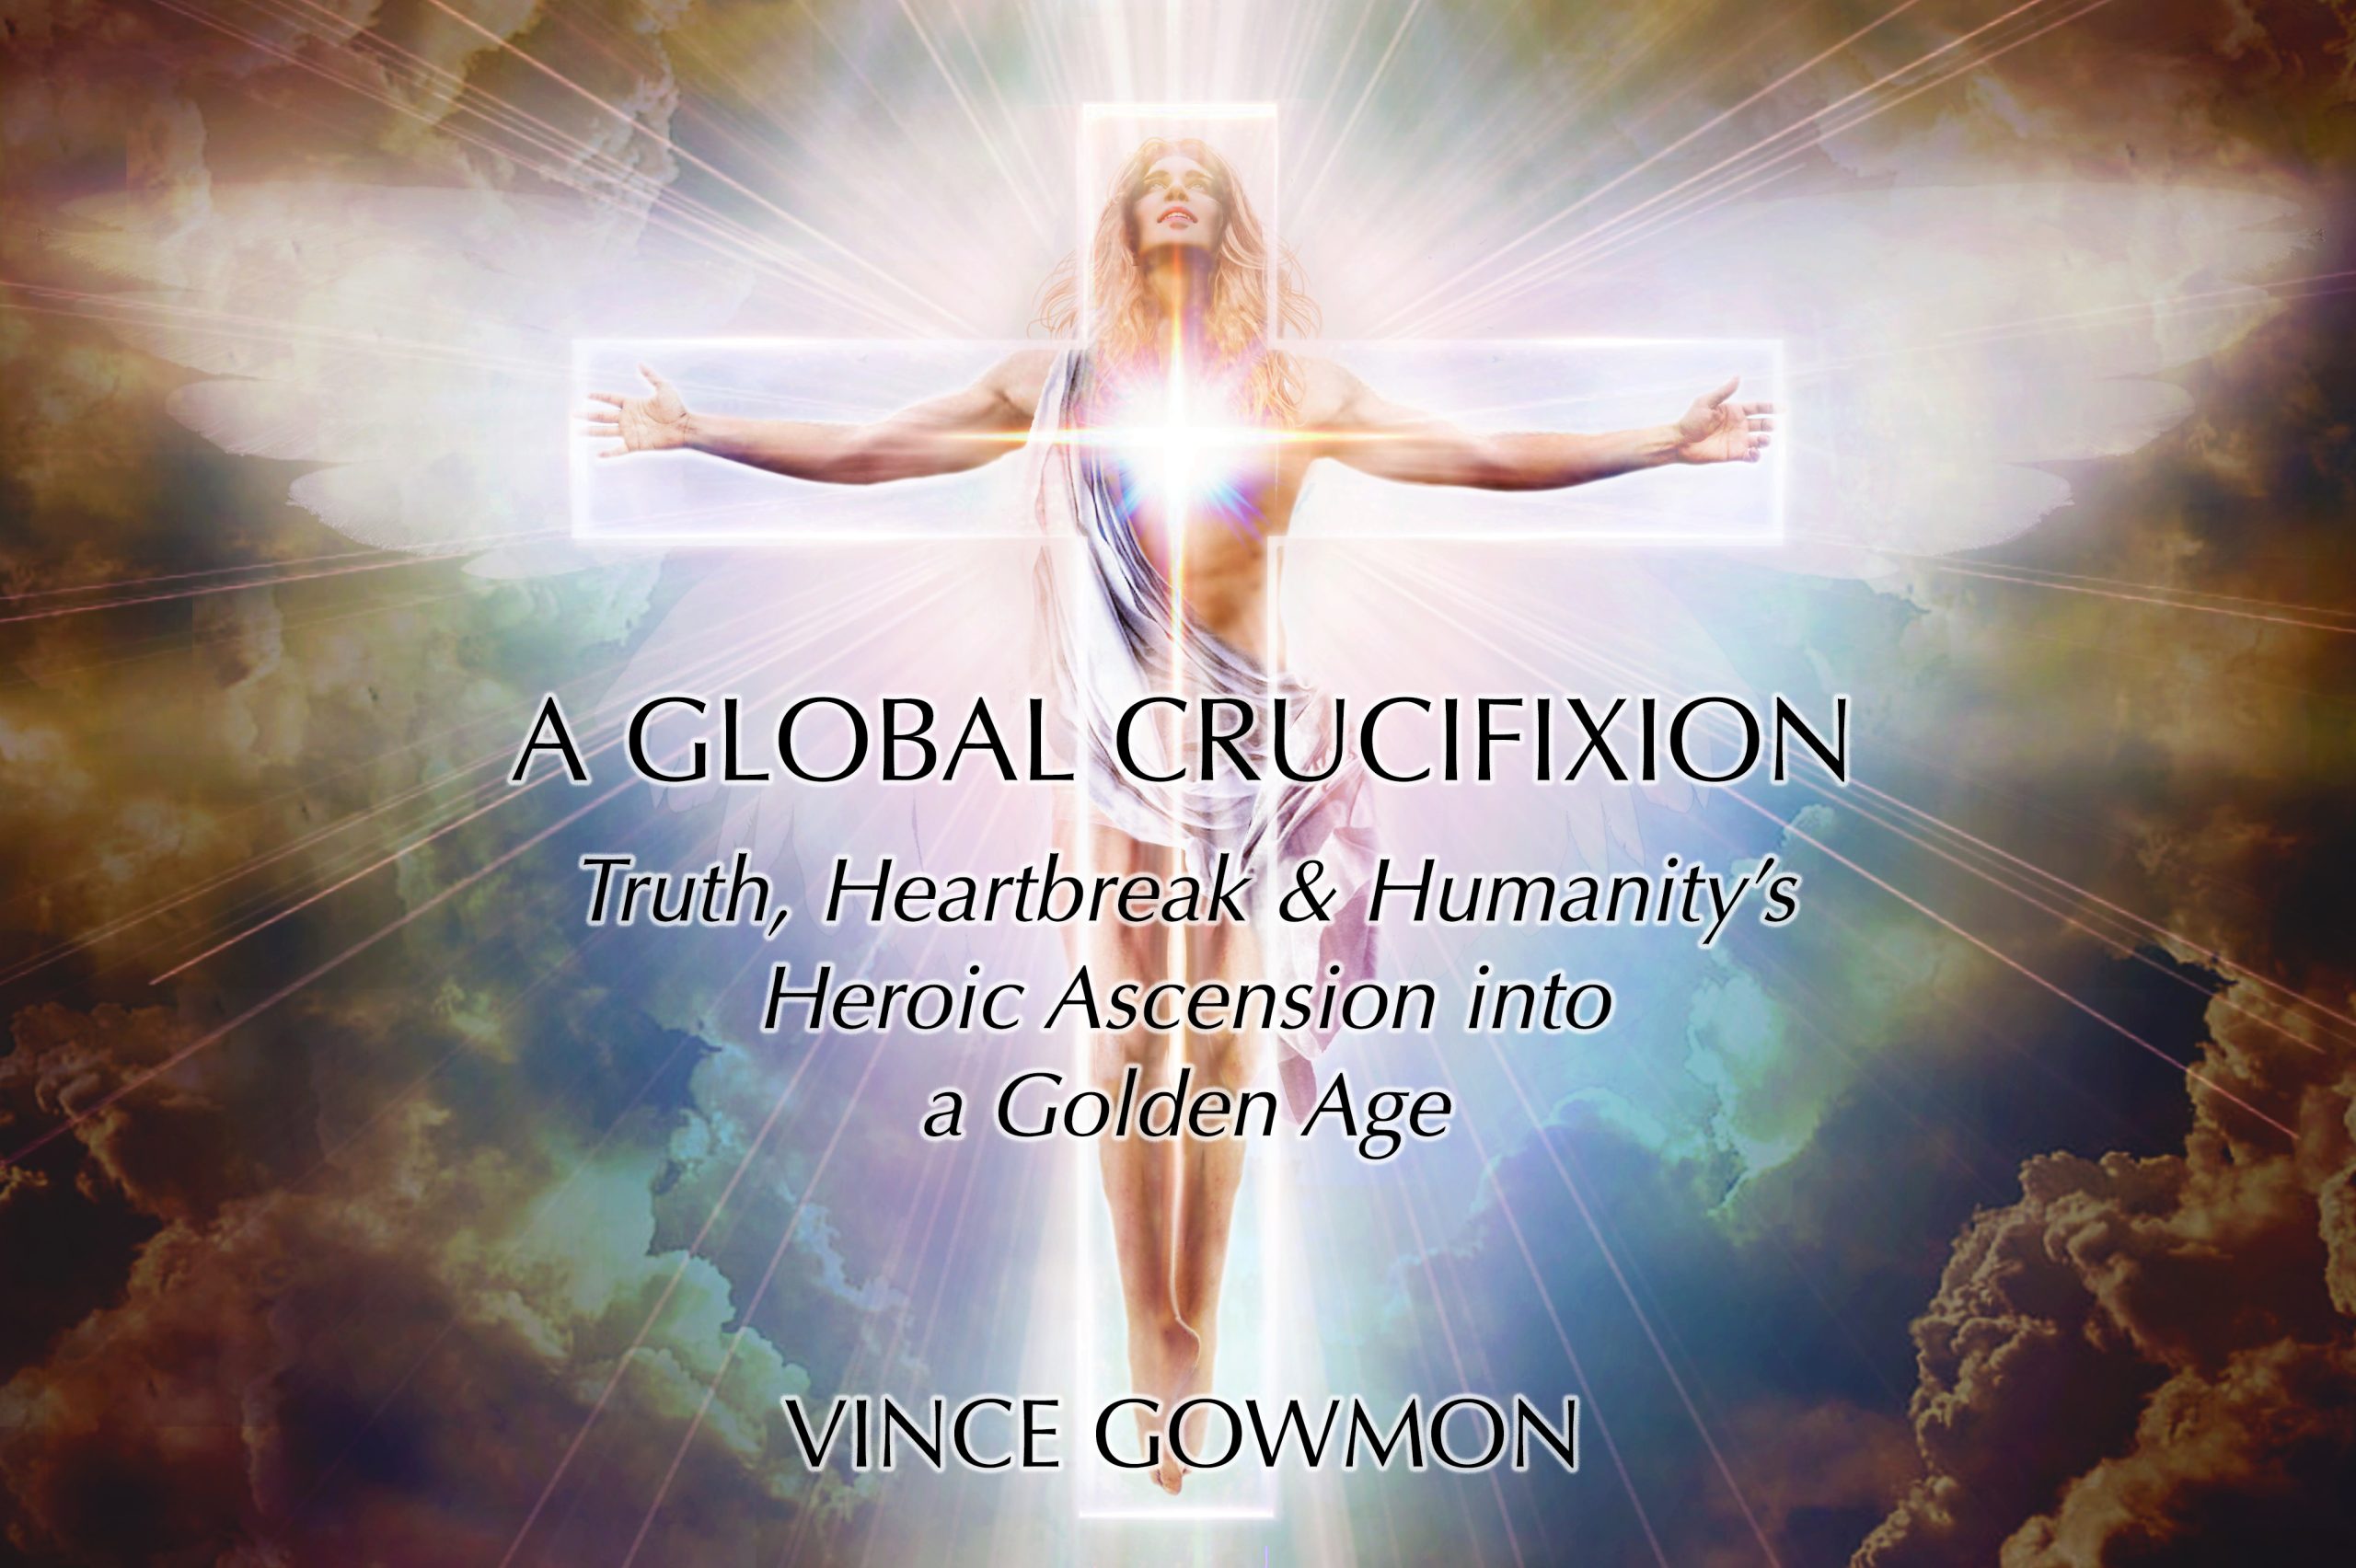 A Global Crucifixion: Truth, Heartbreak & Humanity’s Heroic Ascension into a Golden Age